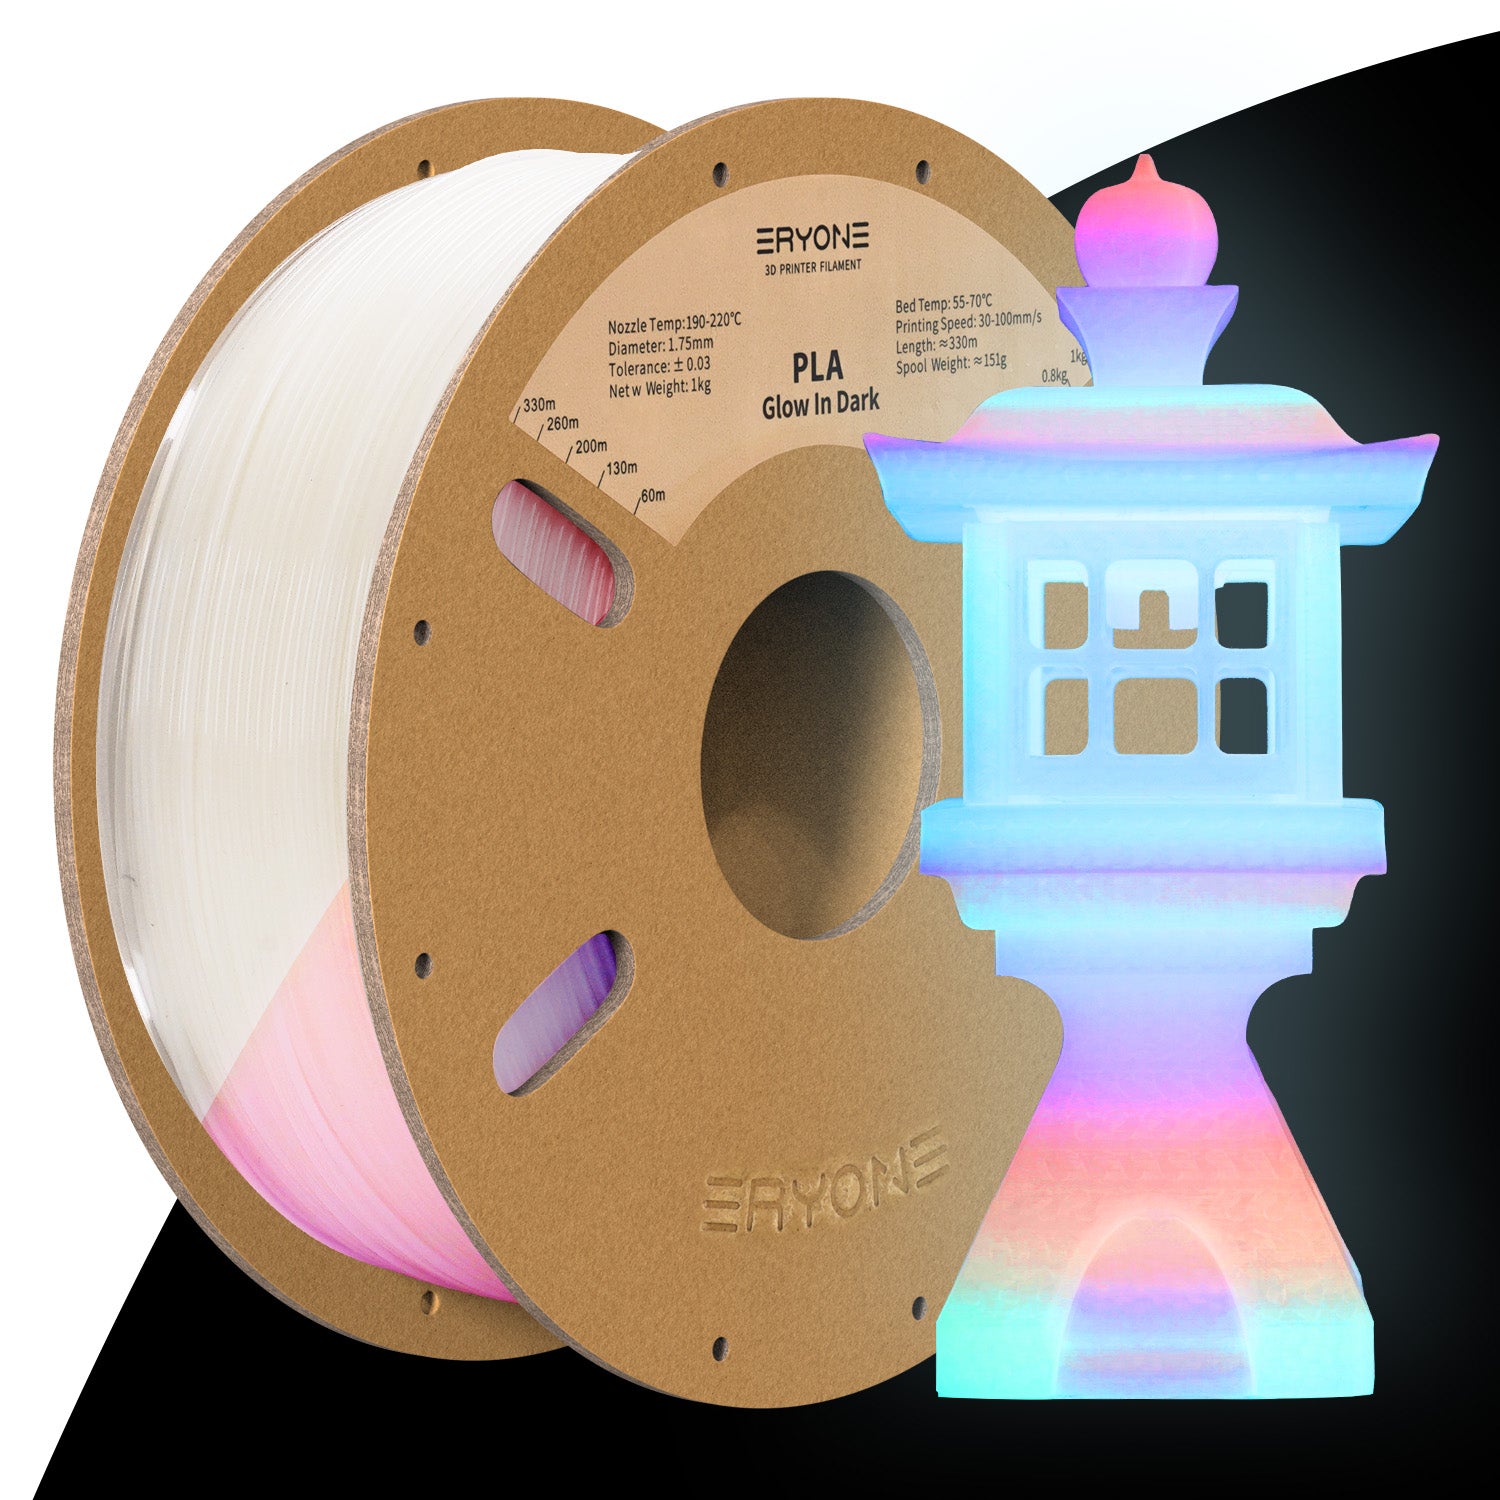 ERYONE Sparkly Glitter Shining PLA Filament for 3D Printer, 1.75Mm